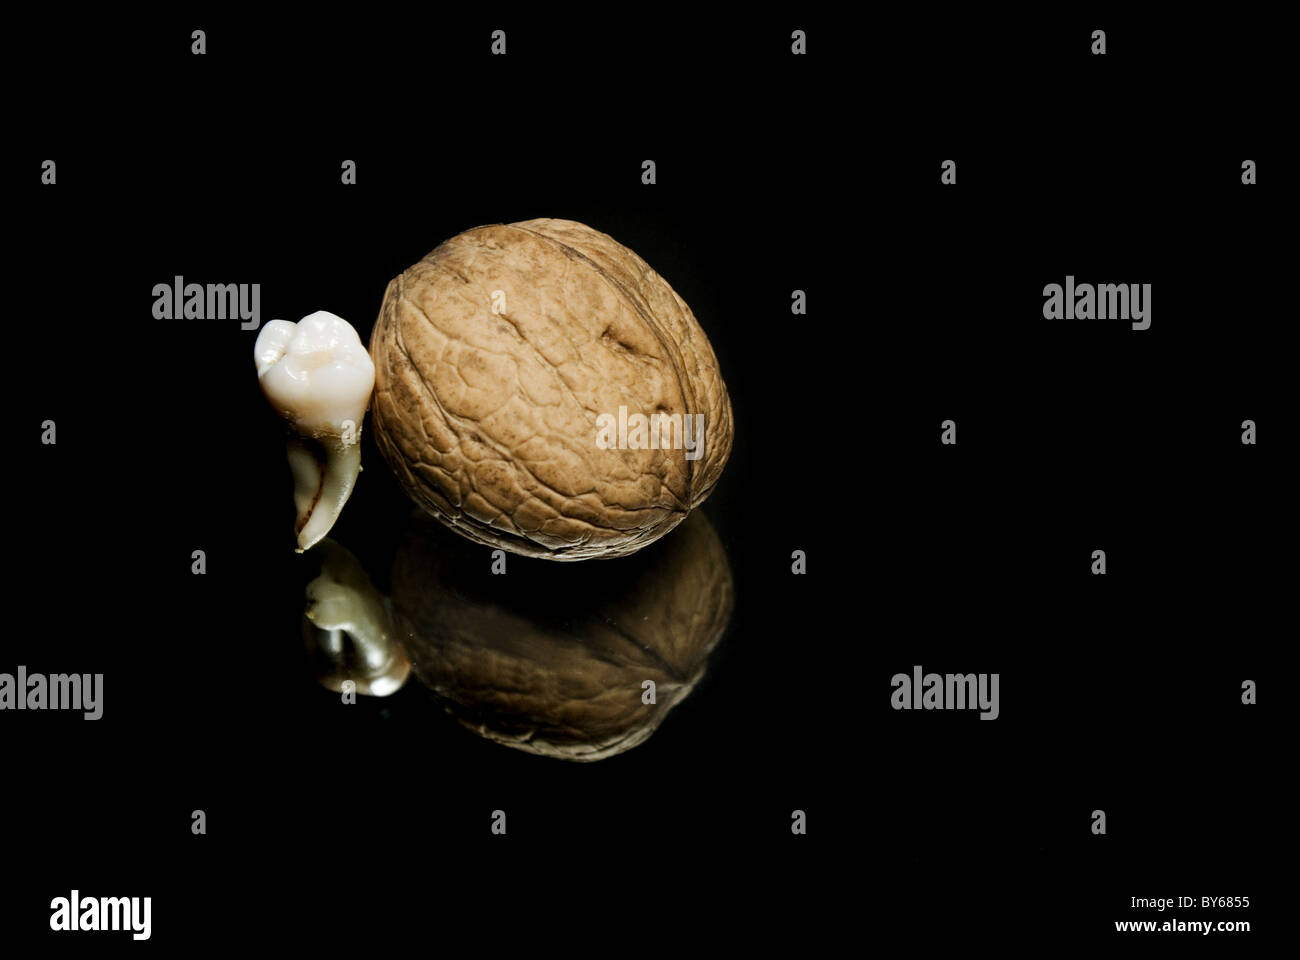 It's tough nut to crack. Conceptional photography of human tooth with walnut on the black background. Stock Photo